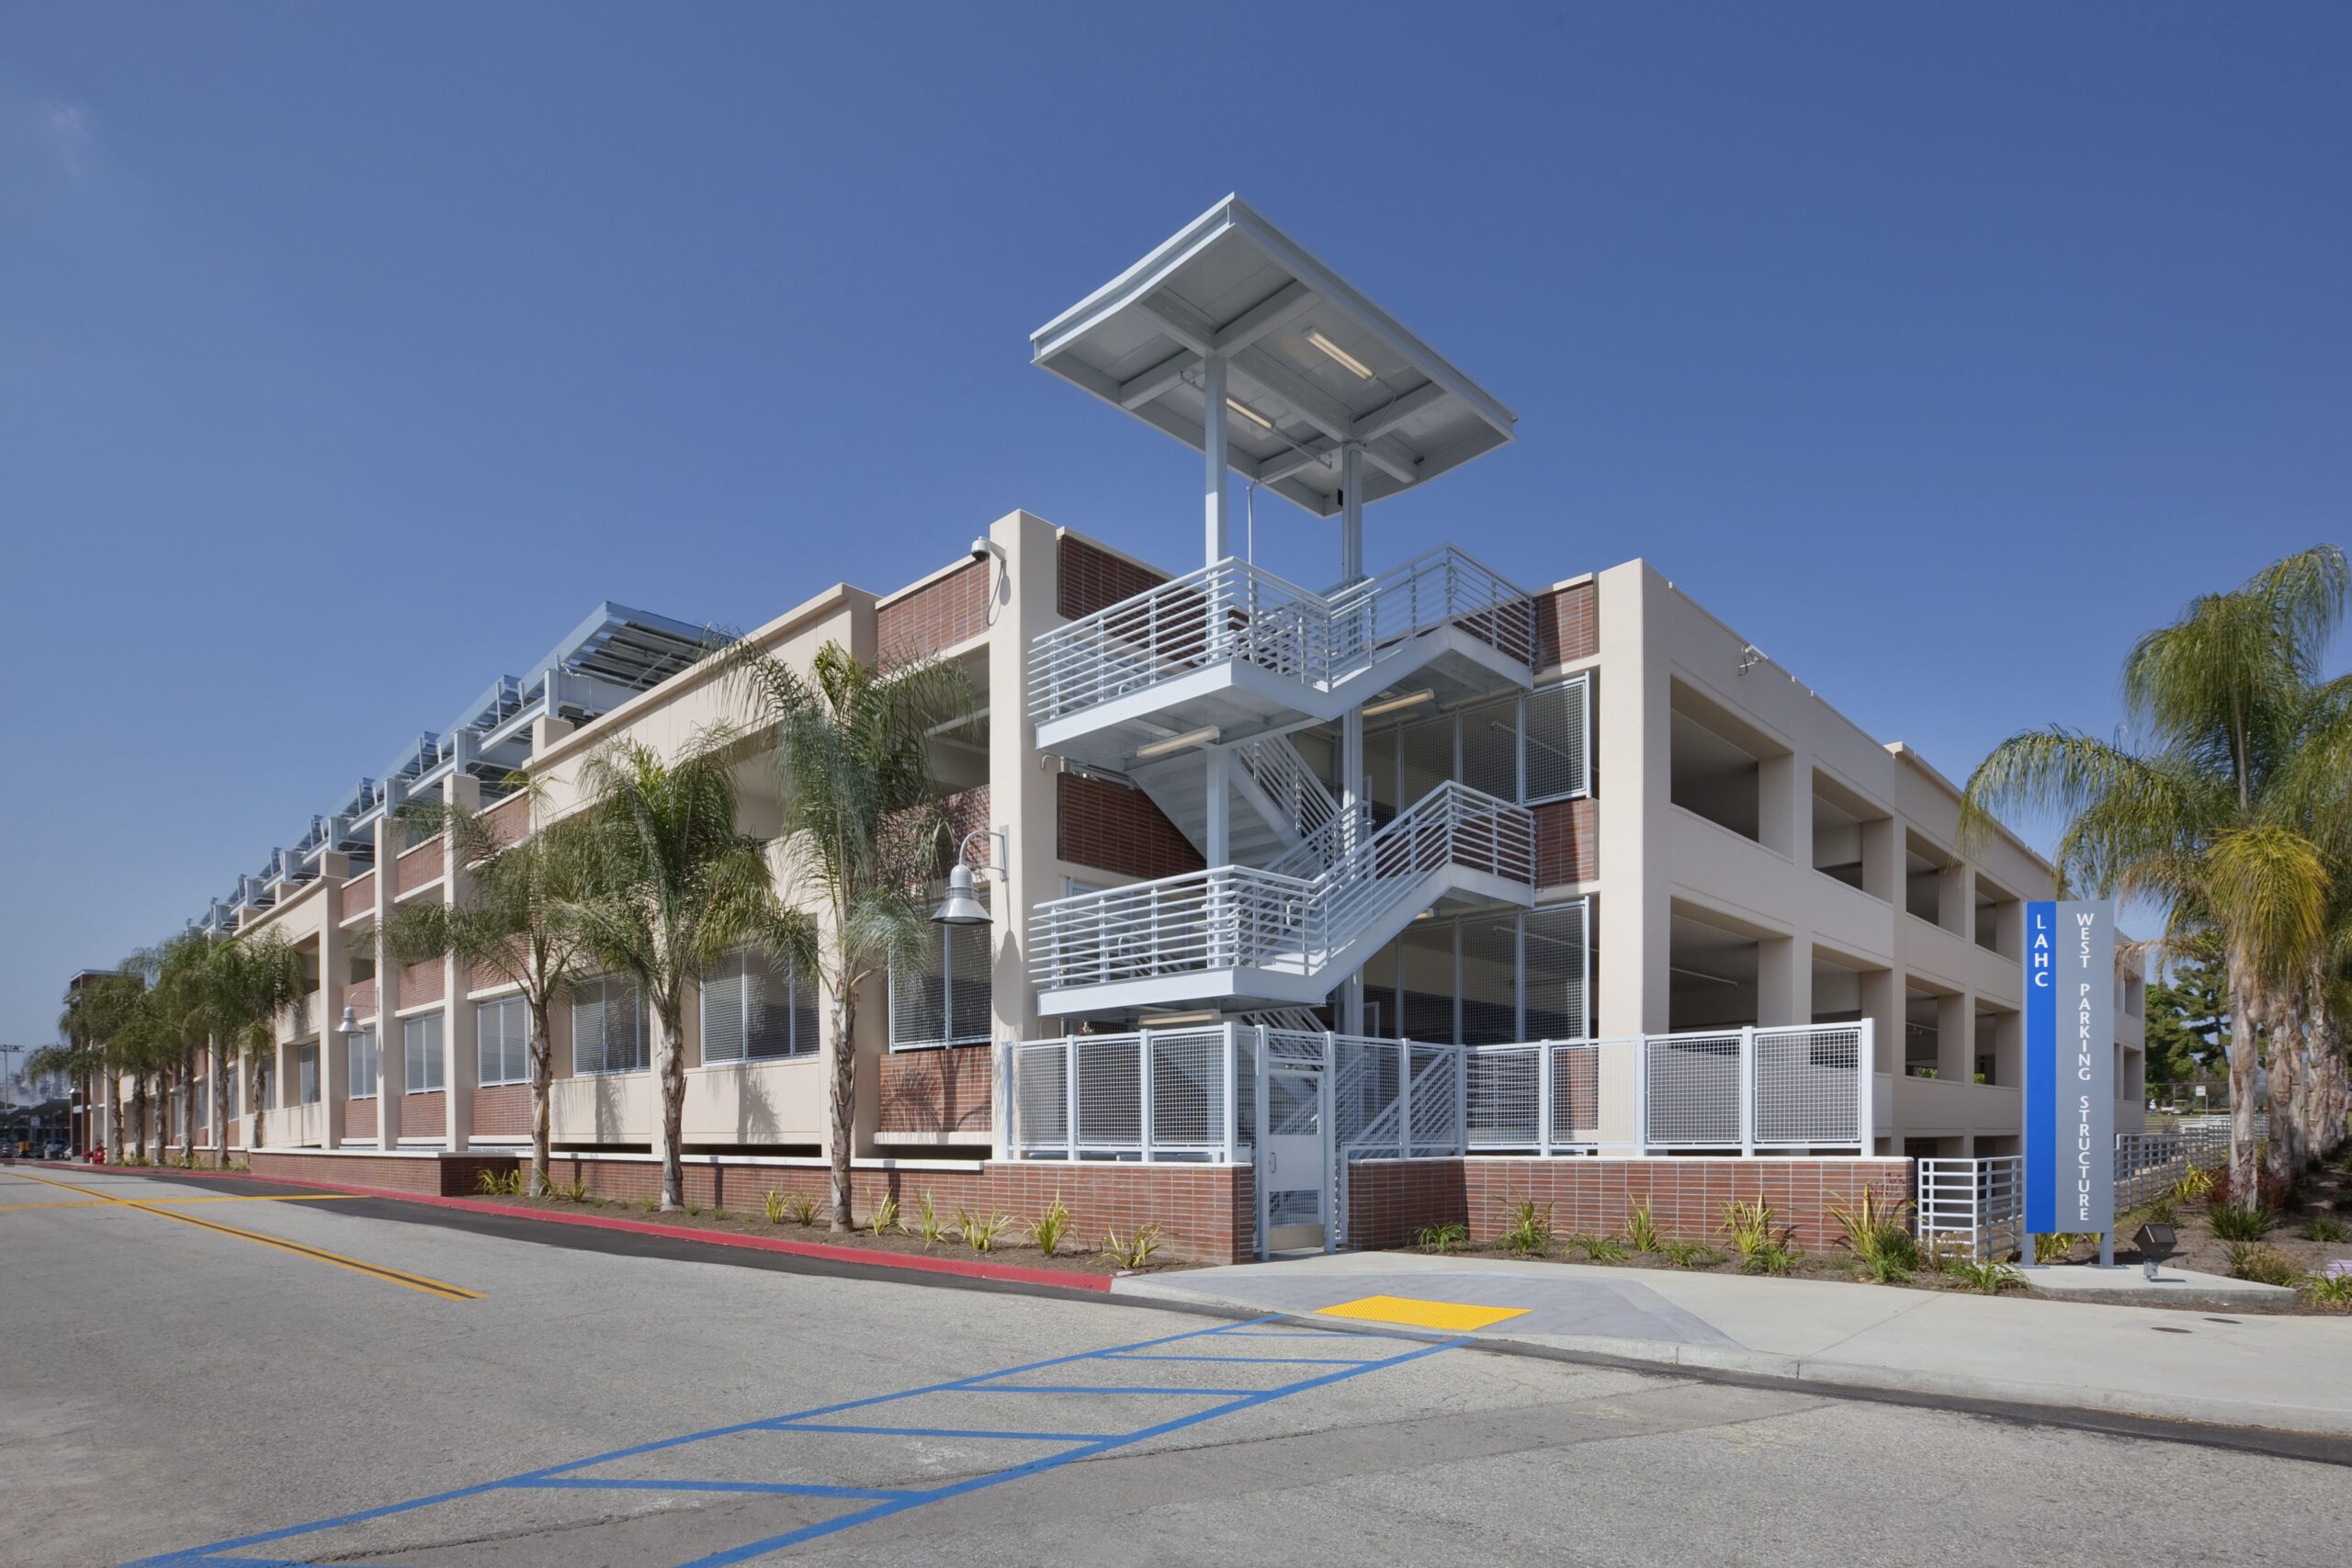 Los Angeles Harbor College Parking Structure